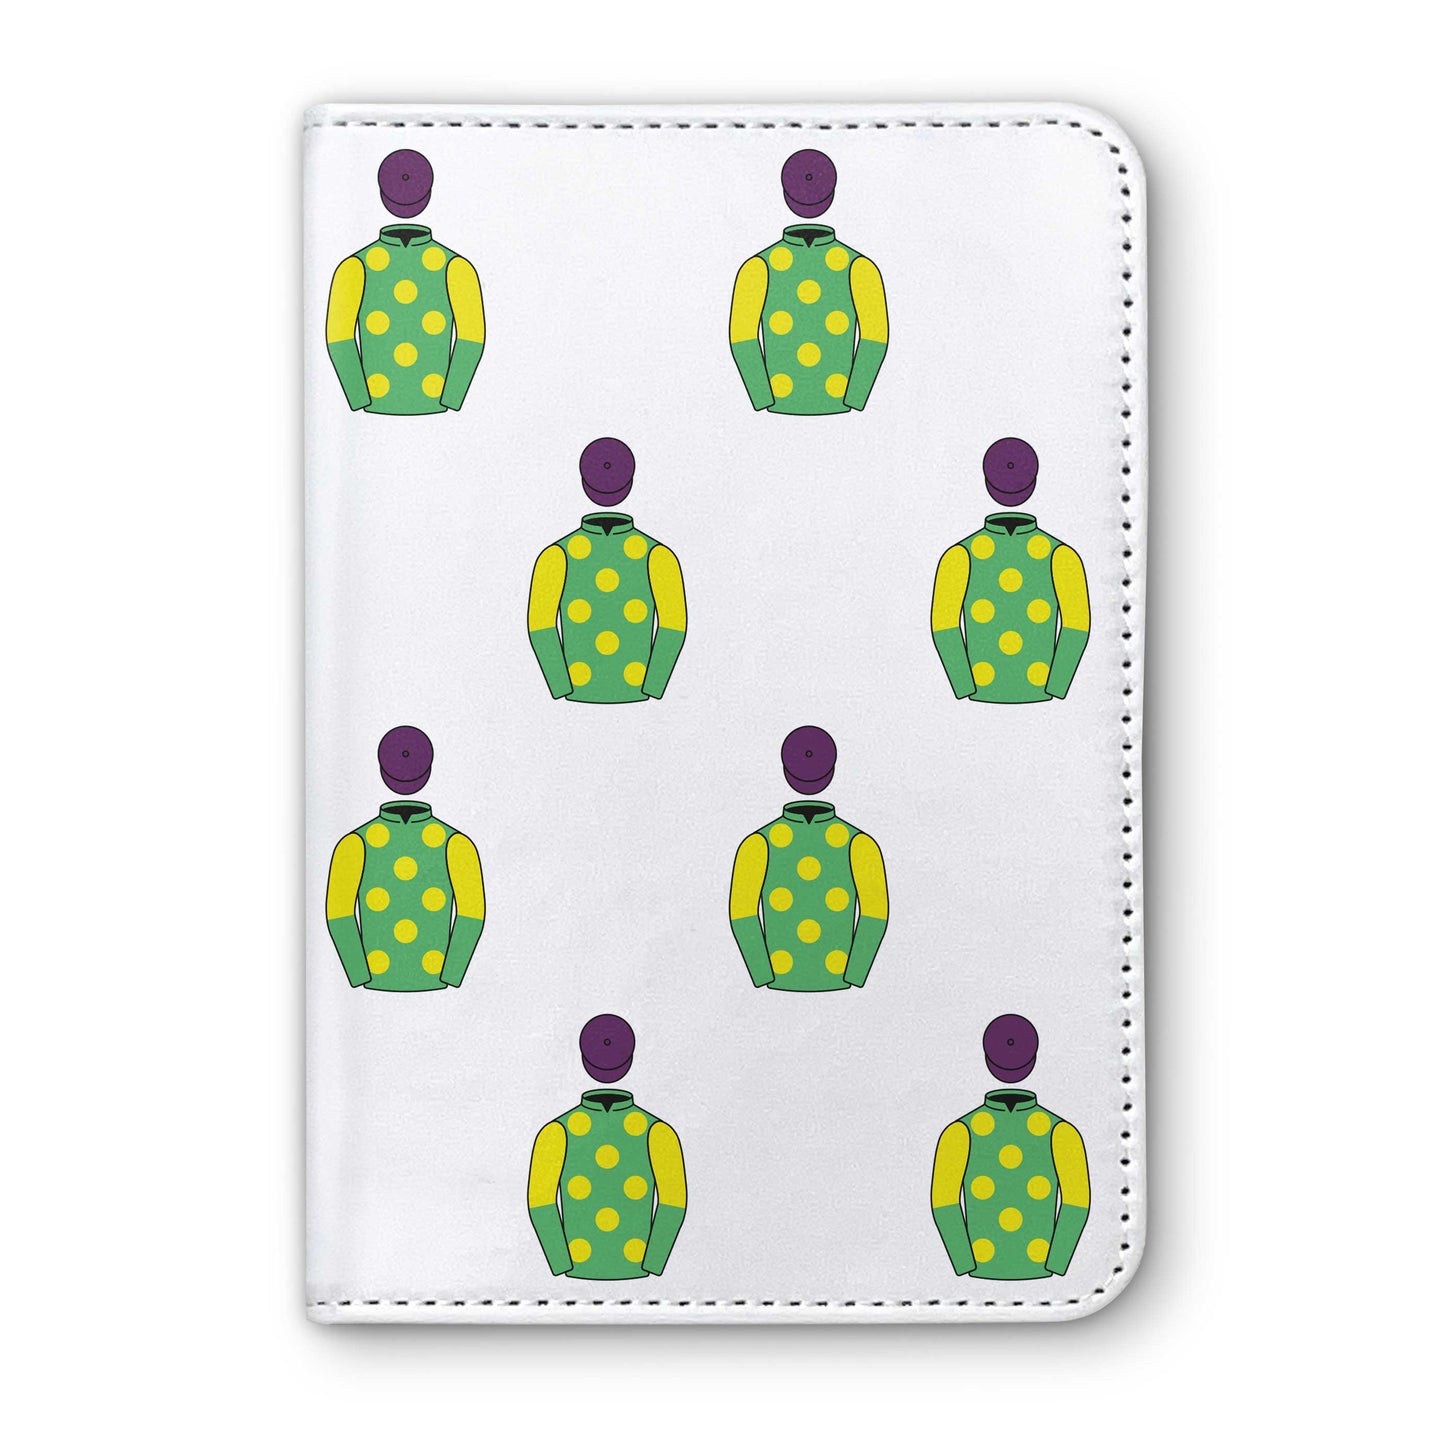 Clive Smith Horse Racing Passport Holder - Hacked Up Horse Racing Gifts